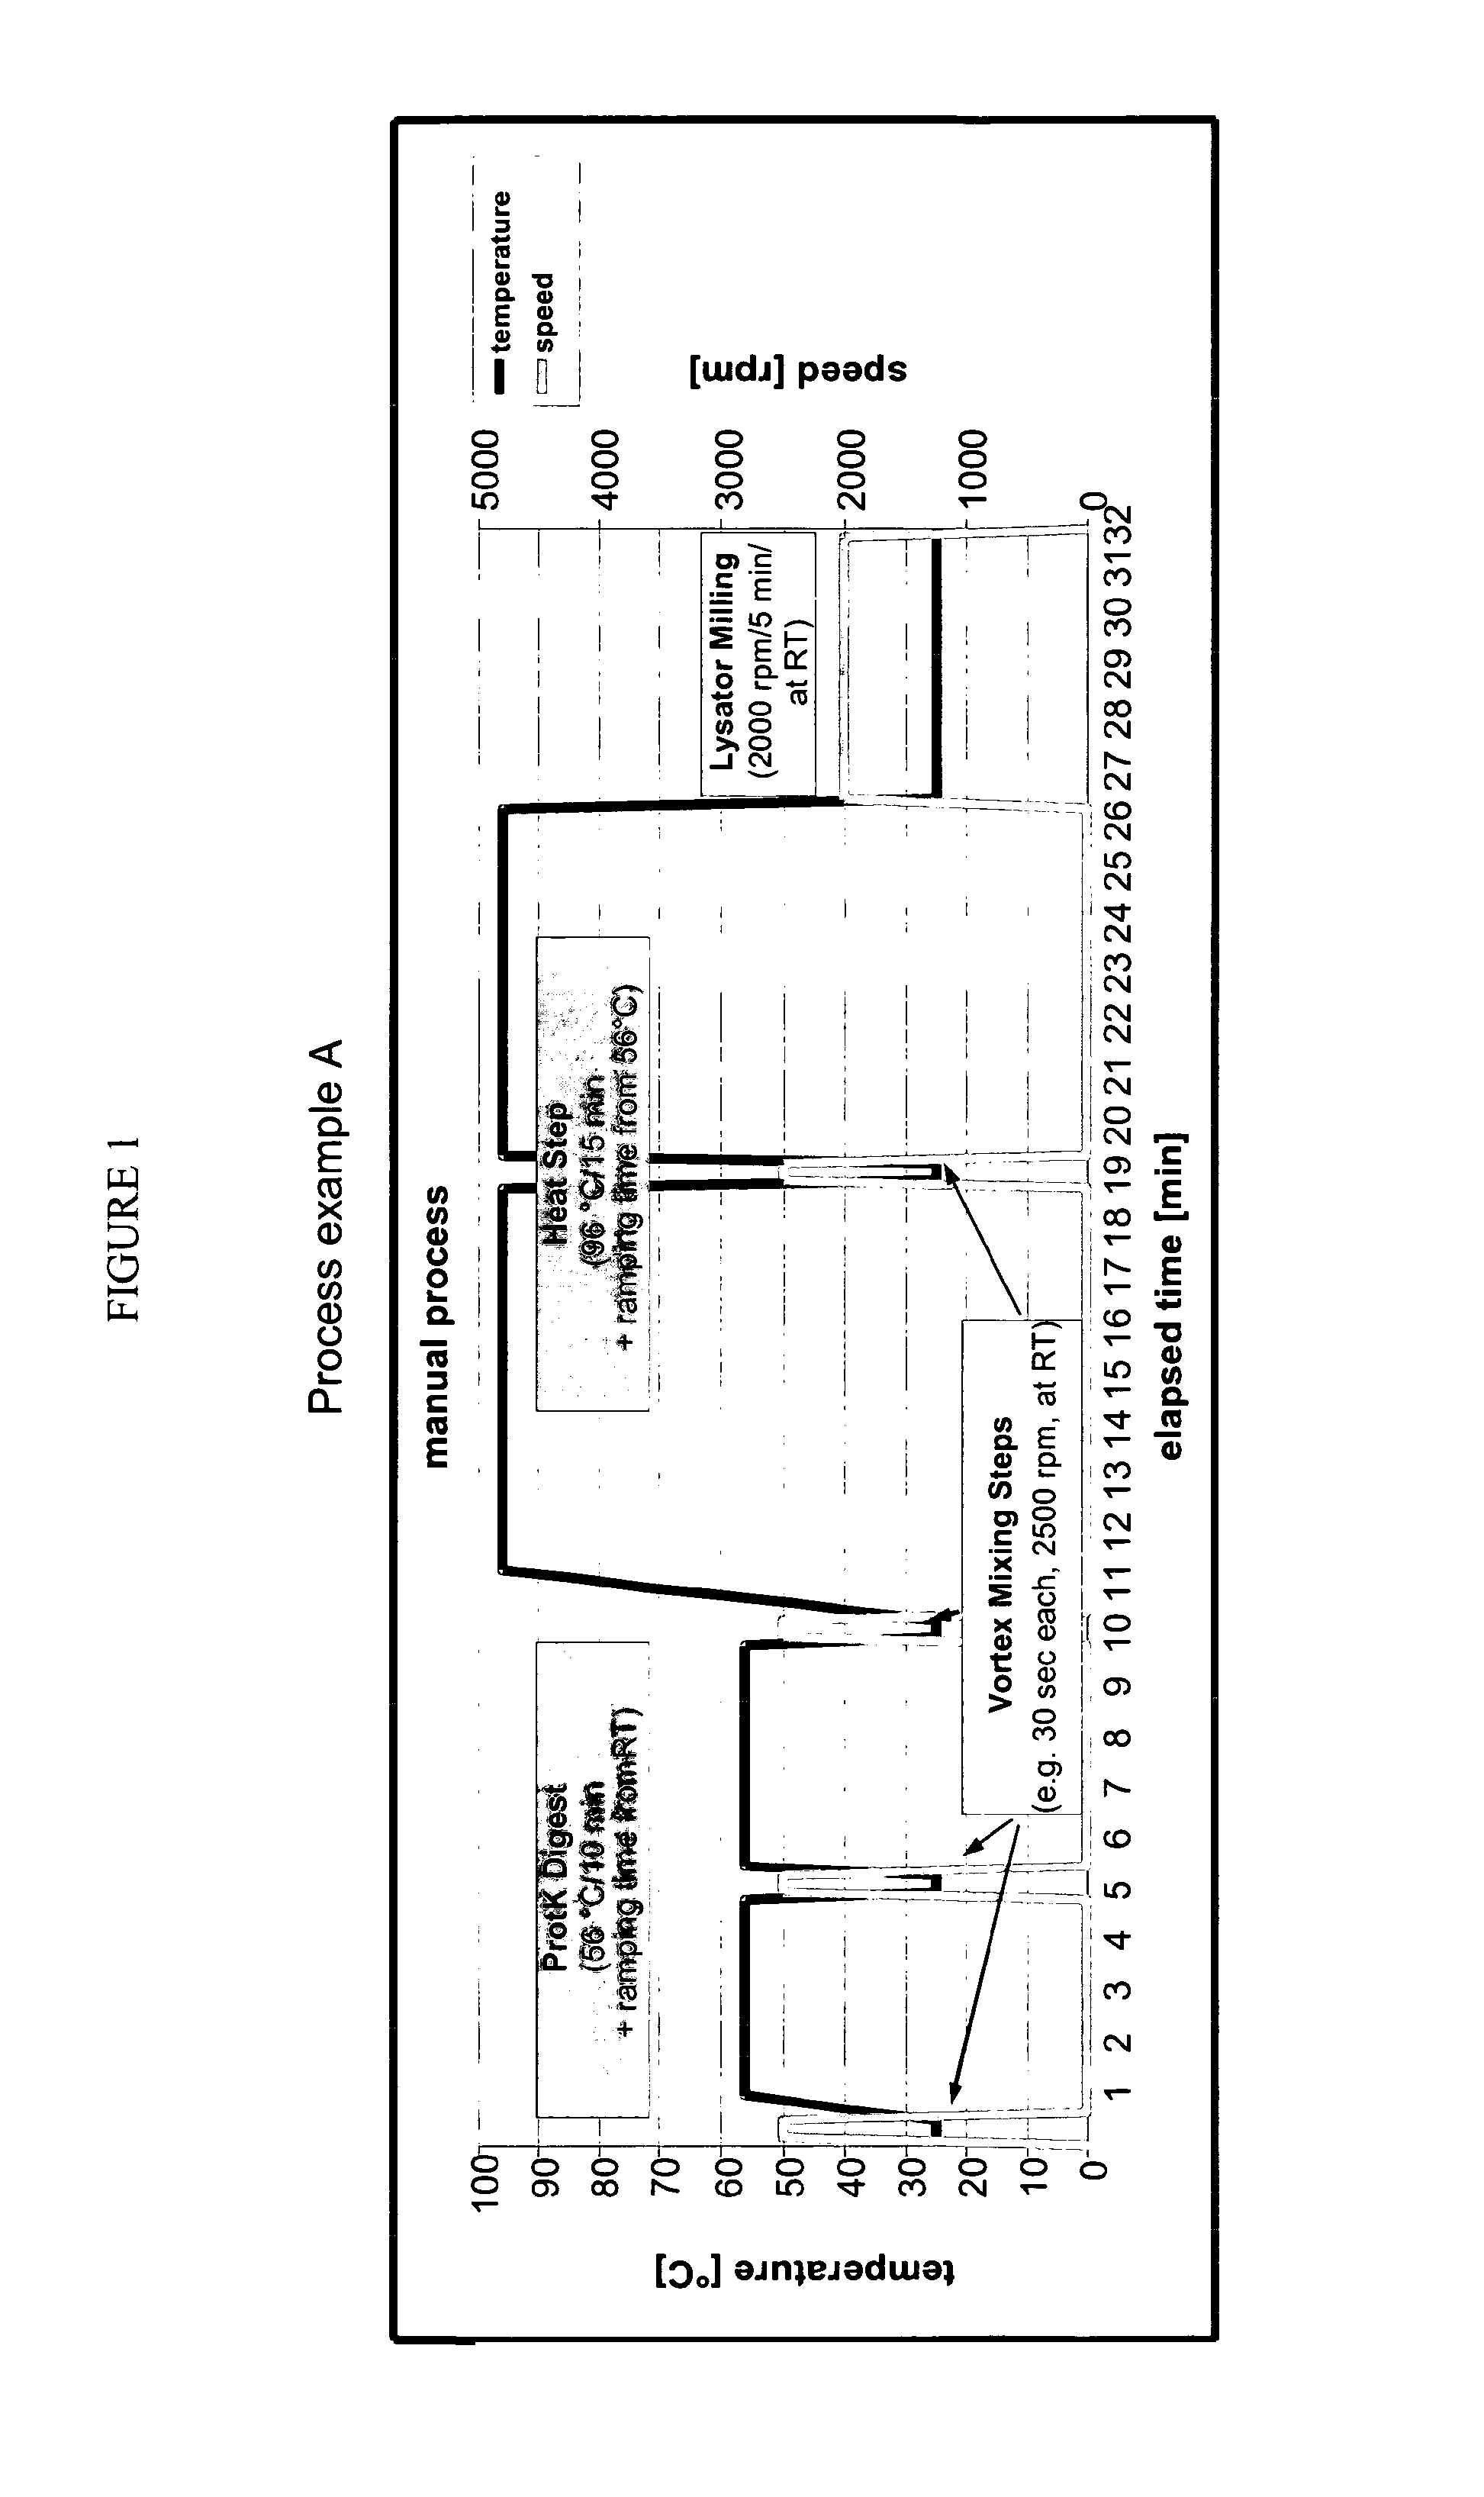 Universally Applicable Lysis Buffer and Processing Methods for the Lysis of Bodily Samples